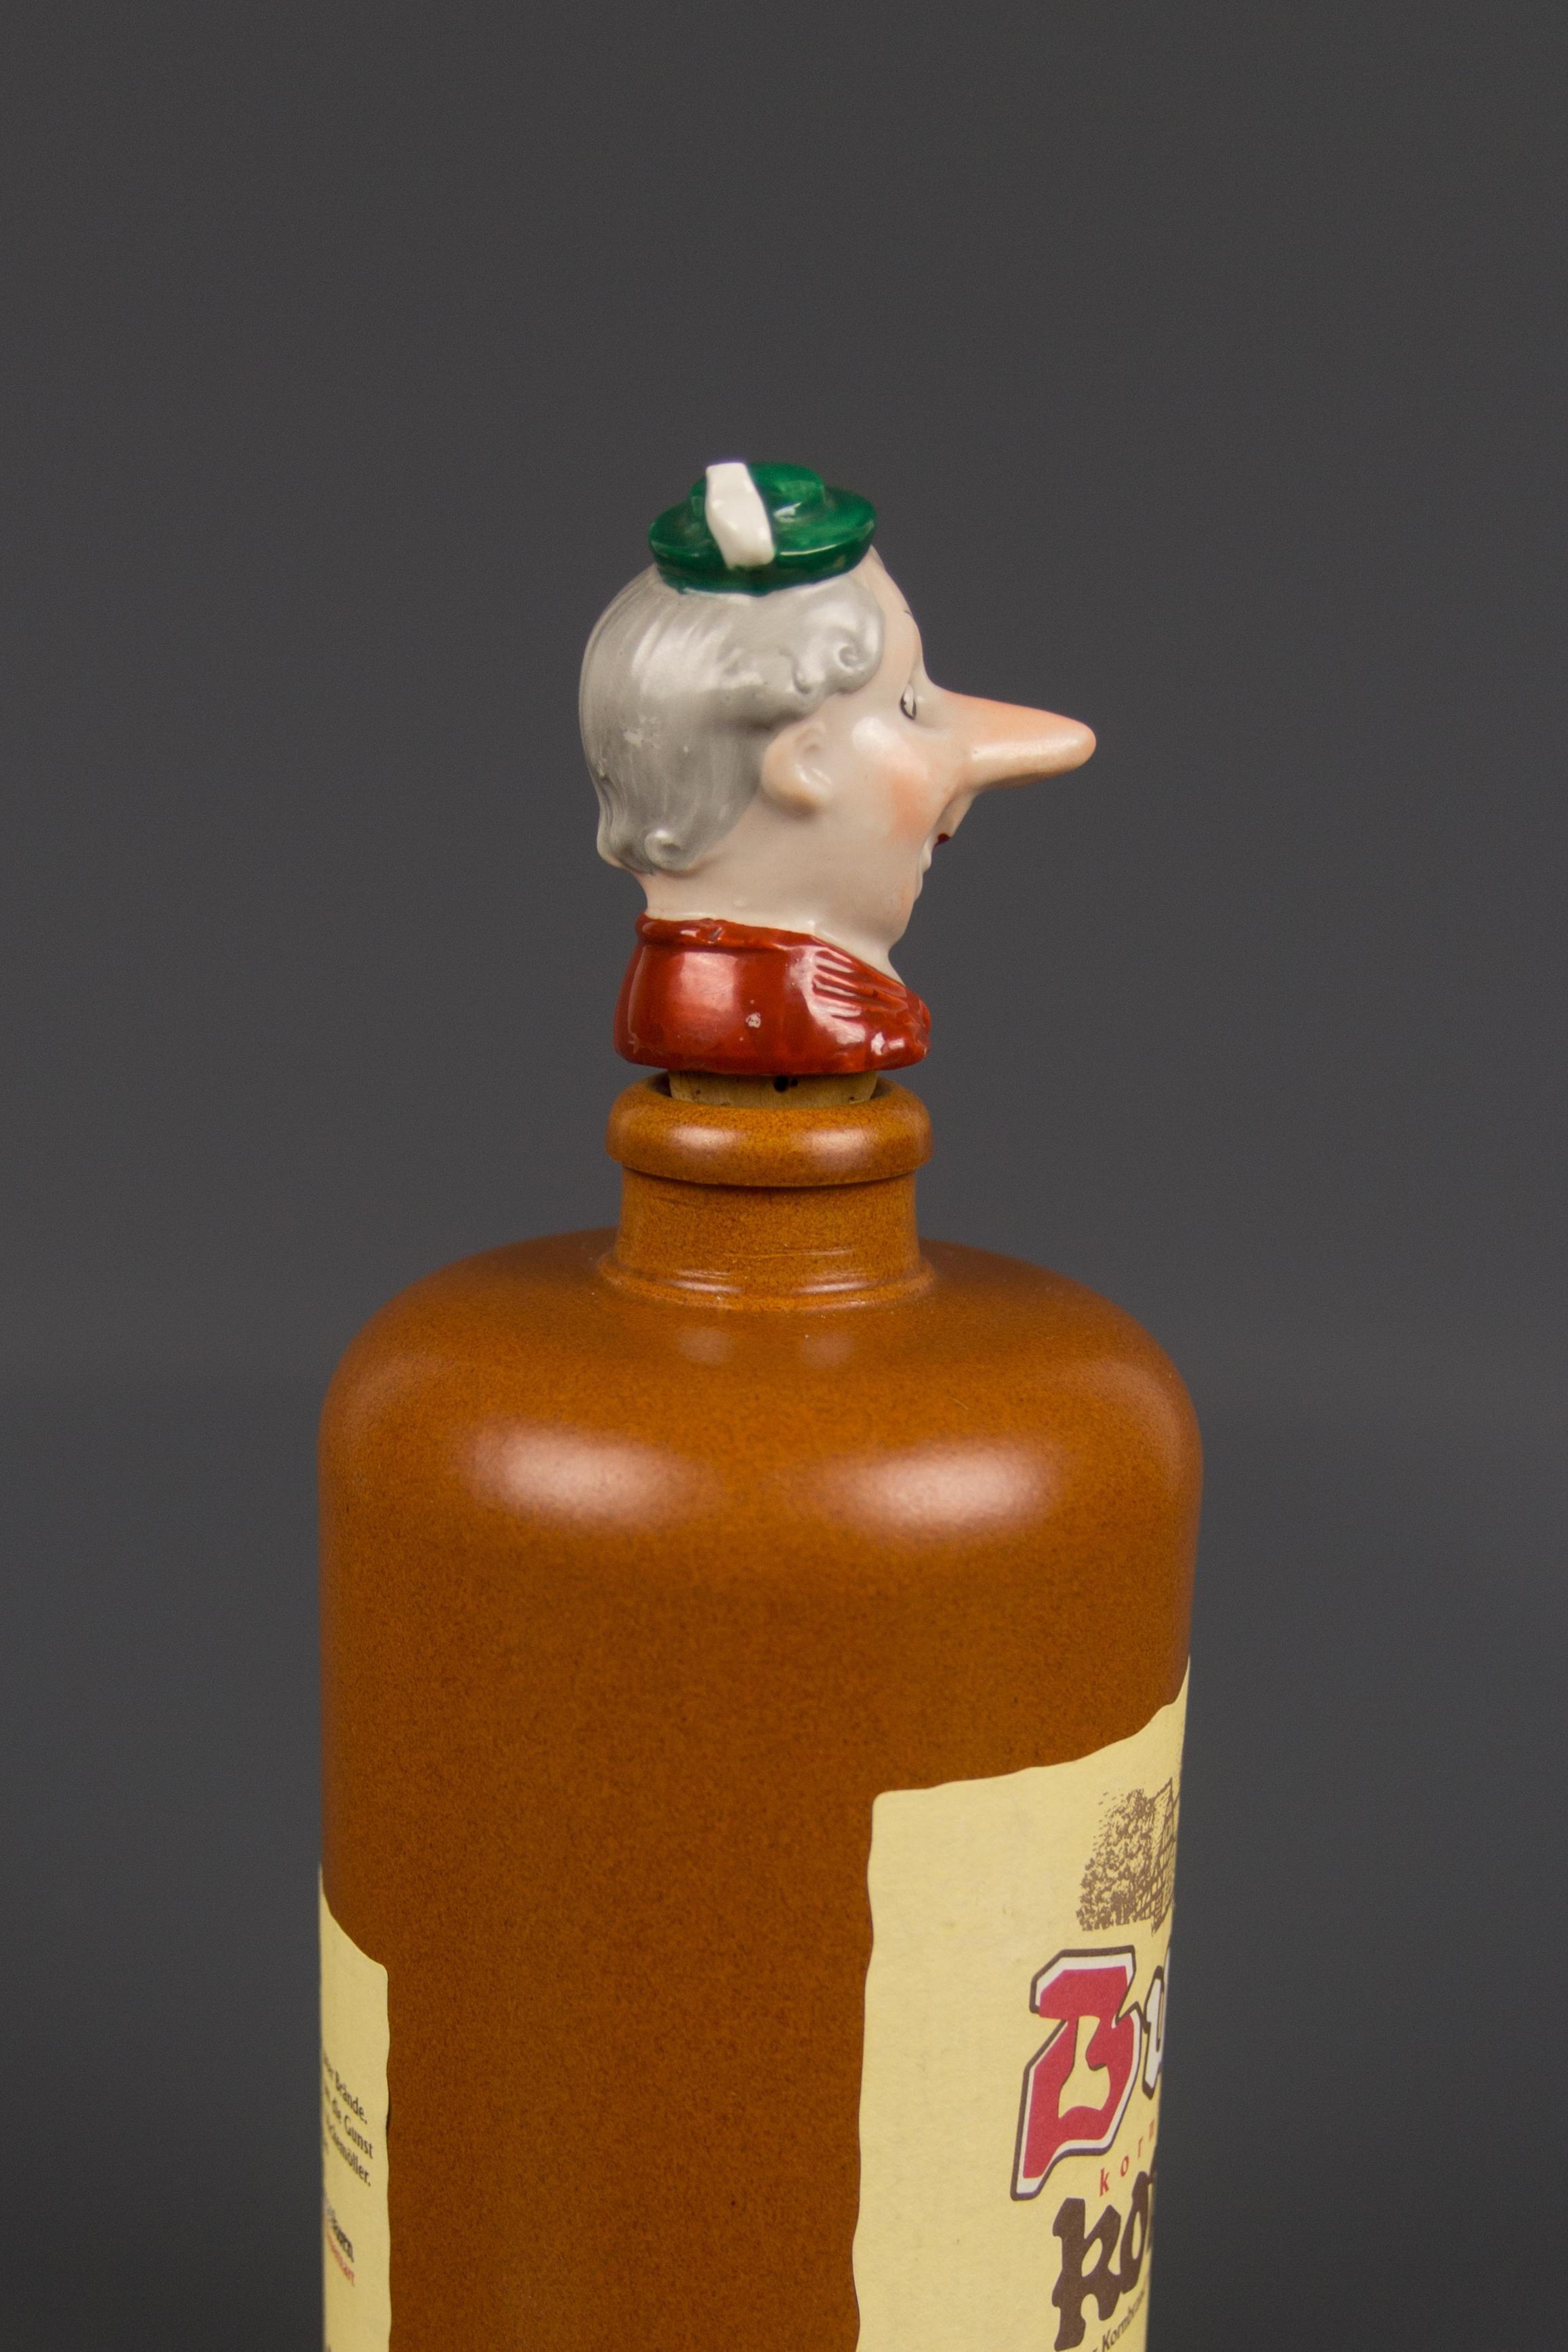 Adorable porcelain cork pourer or bottle stopper. It depicts a cheerful and beautifully painted man with a small green hat and red neckerchief, Germany, 1930s.
Ideal decoration - pourer or bottle stopper. Great idea to surprise your guests or a